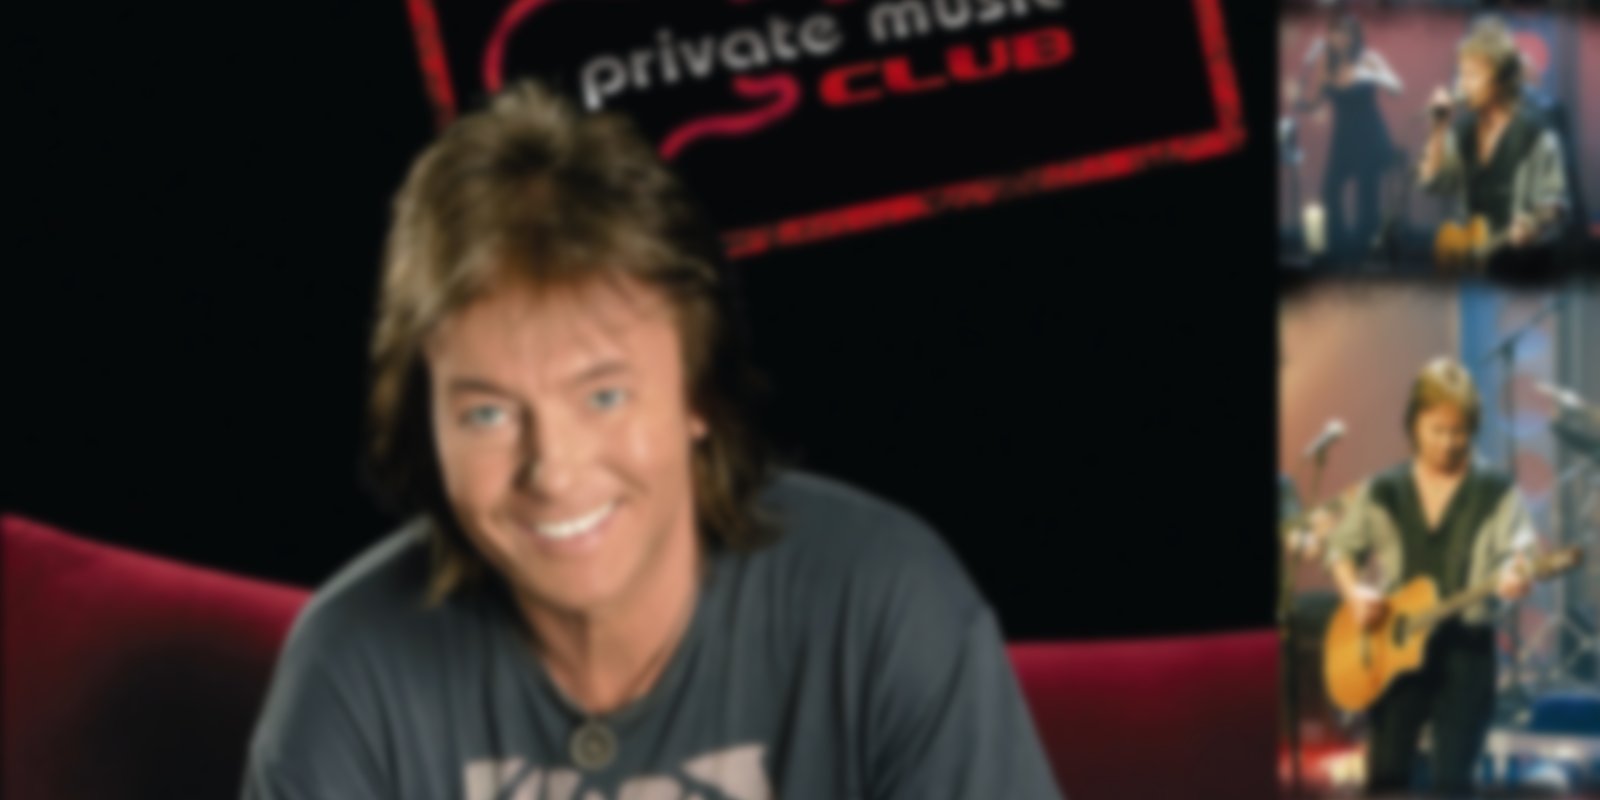 Chris Norman & Band - One Acoustic Evening